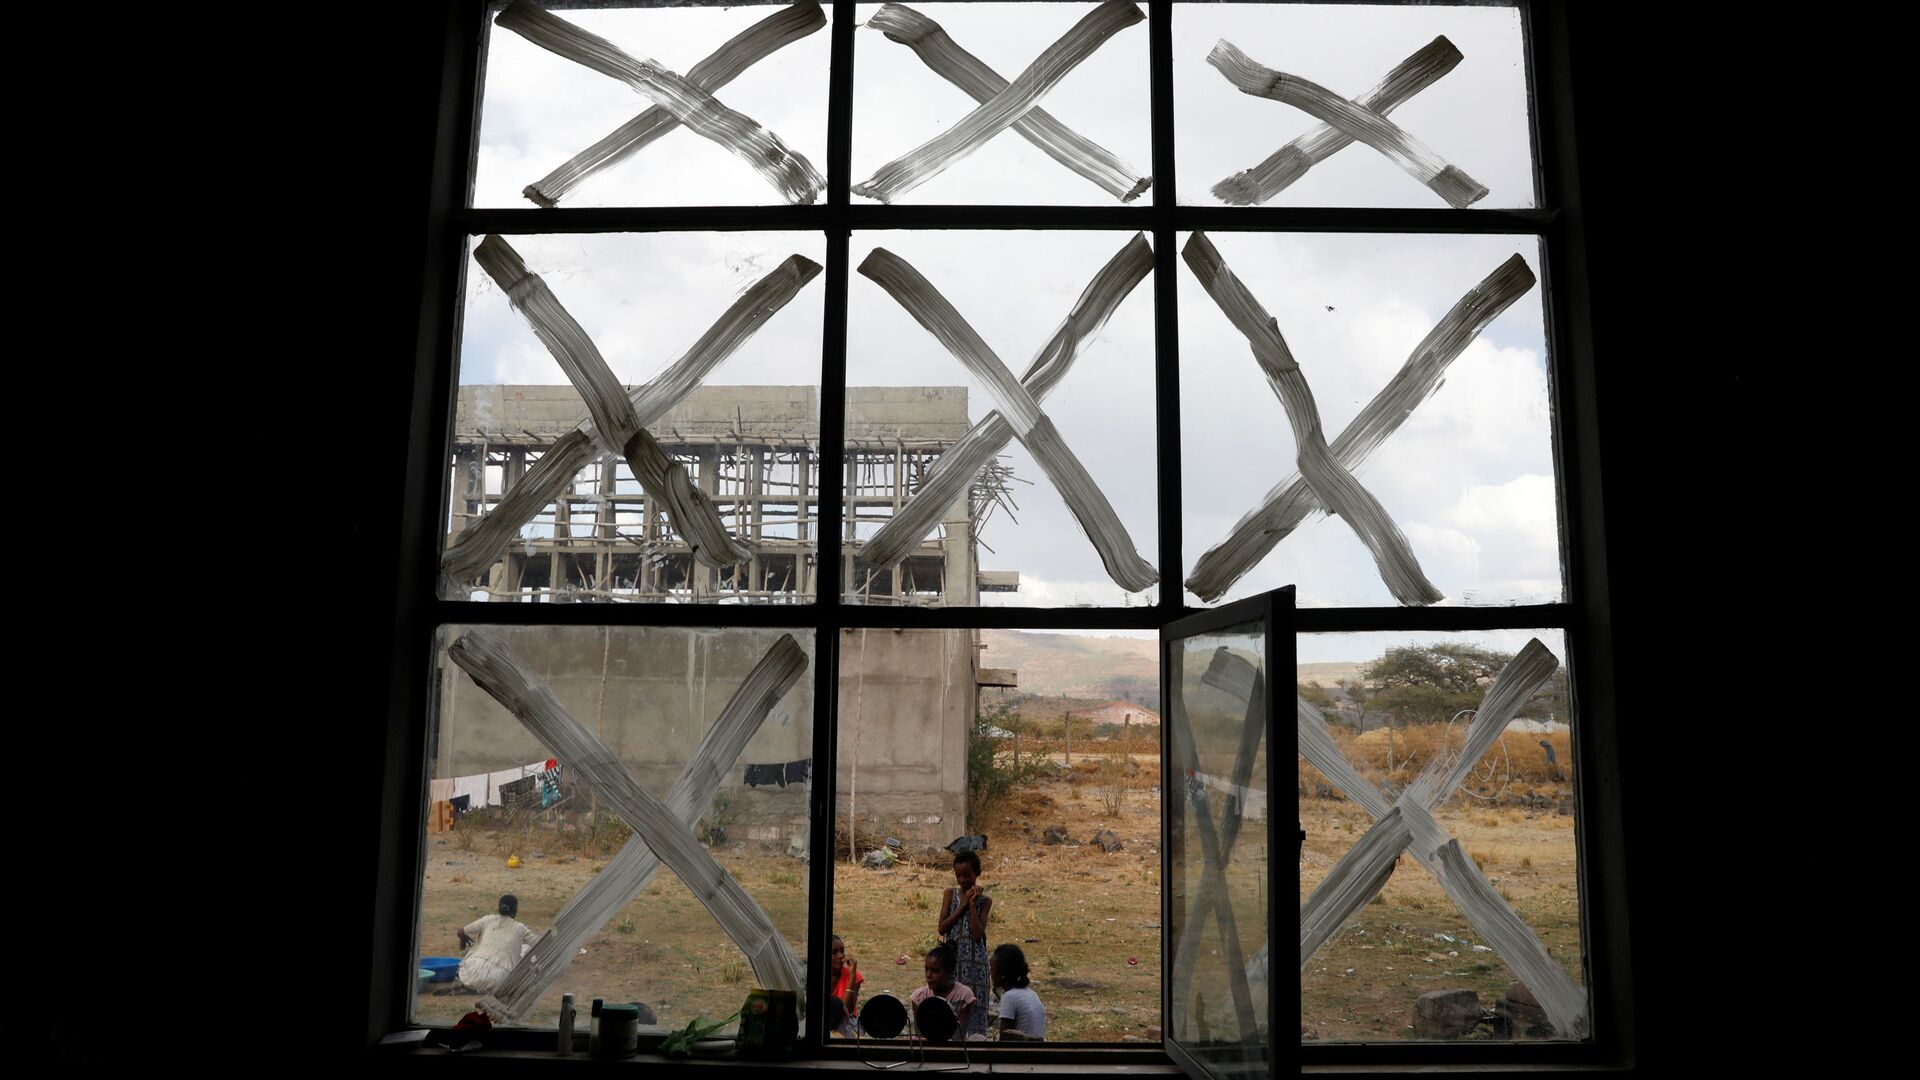 Displaced people are seen at the Shire campus of Aksum University, which was turned into a temporary shelter for people displaced by conflict, in the town of Shire, Tigray region, Ethiopia, March 15, 2021 - Sputnik International, 1920, 30.06.2021